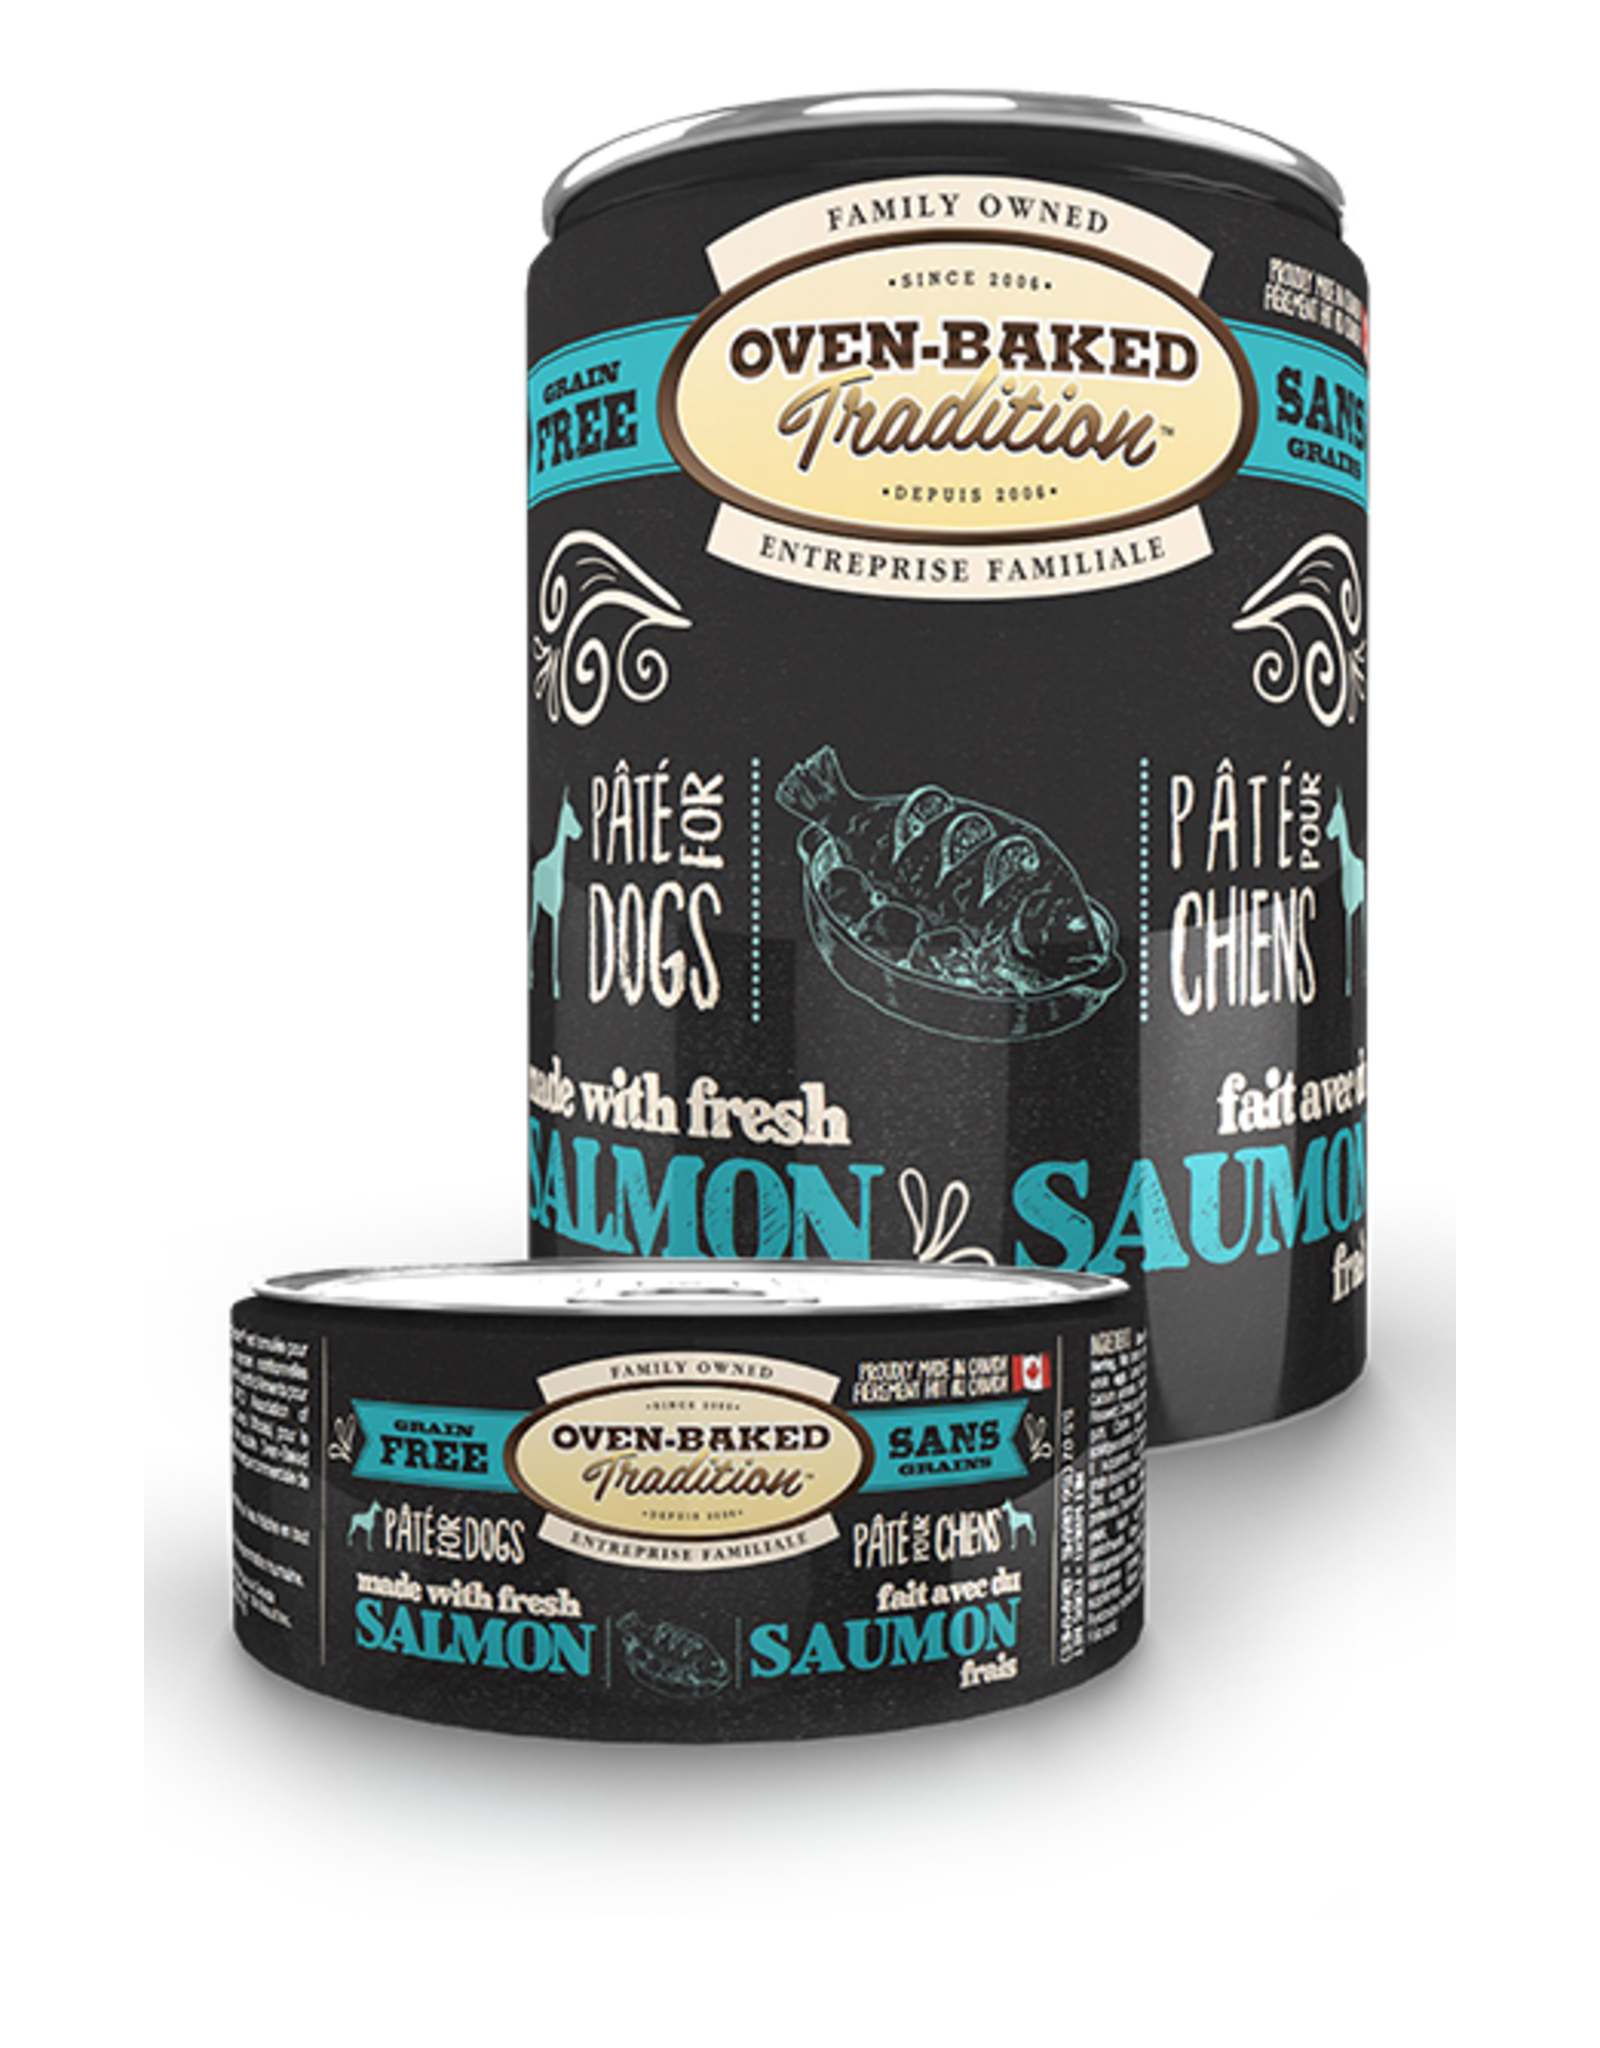 Oven-Baked Tradition Oven-baked pâté Saumon 12.5oz